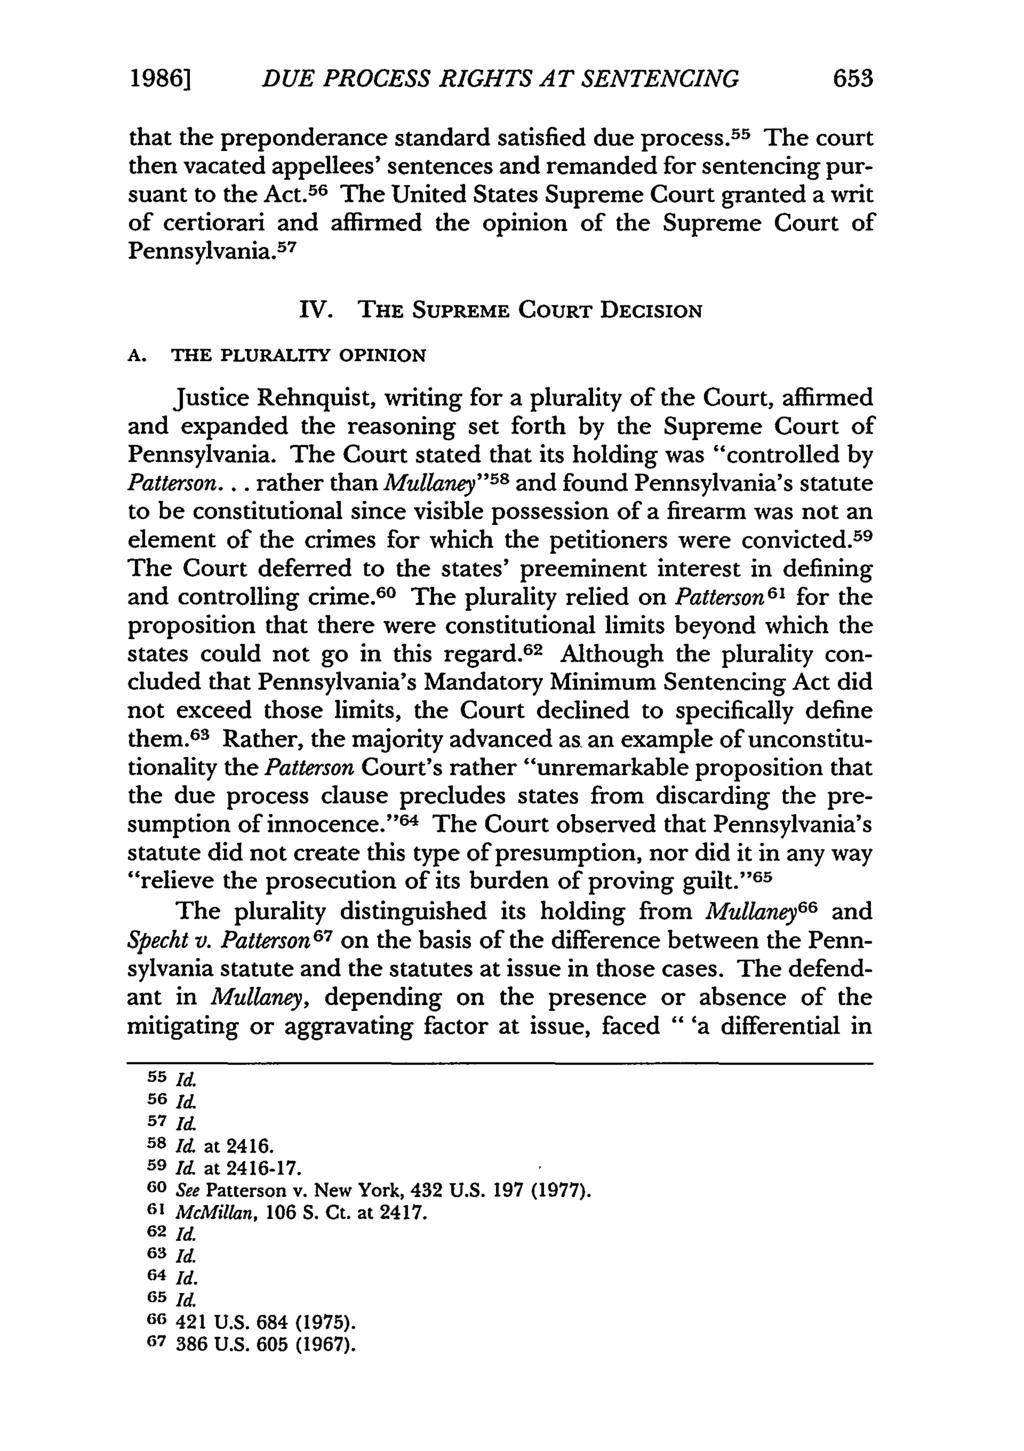 1986] DUE PROCESS RIGHTS AT SENTENCING 653 that the preponderance standard satisfied due process. 55 The court then vacated appellees' sentences and remanded for sentencing pursuant to the Act.